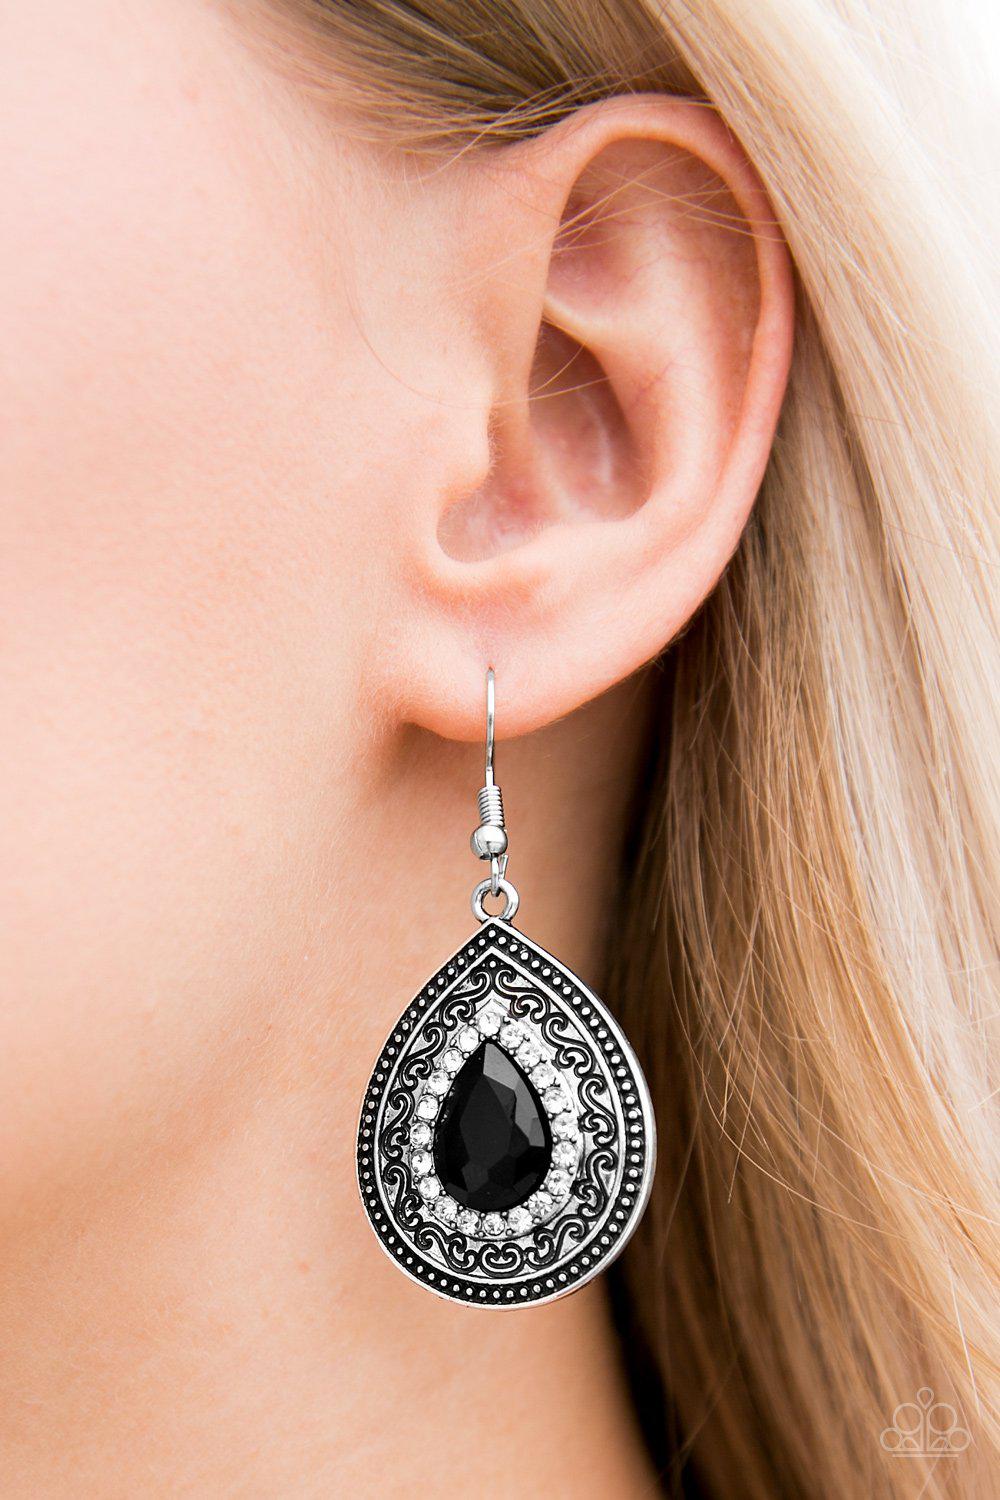 Happy Wife Happy Life Black and White Rhinestone Earrings - Paparazzi Accessories - model -CarasShop.com - $5 Jewelry by Cara Jewels